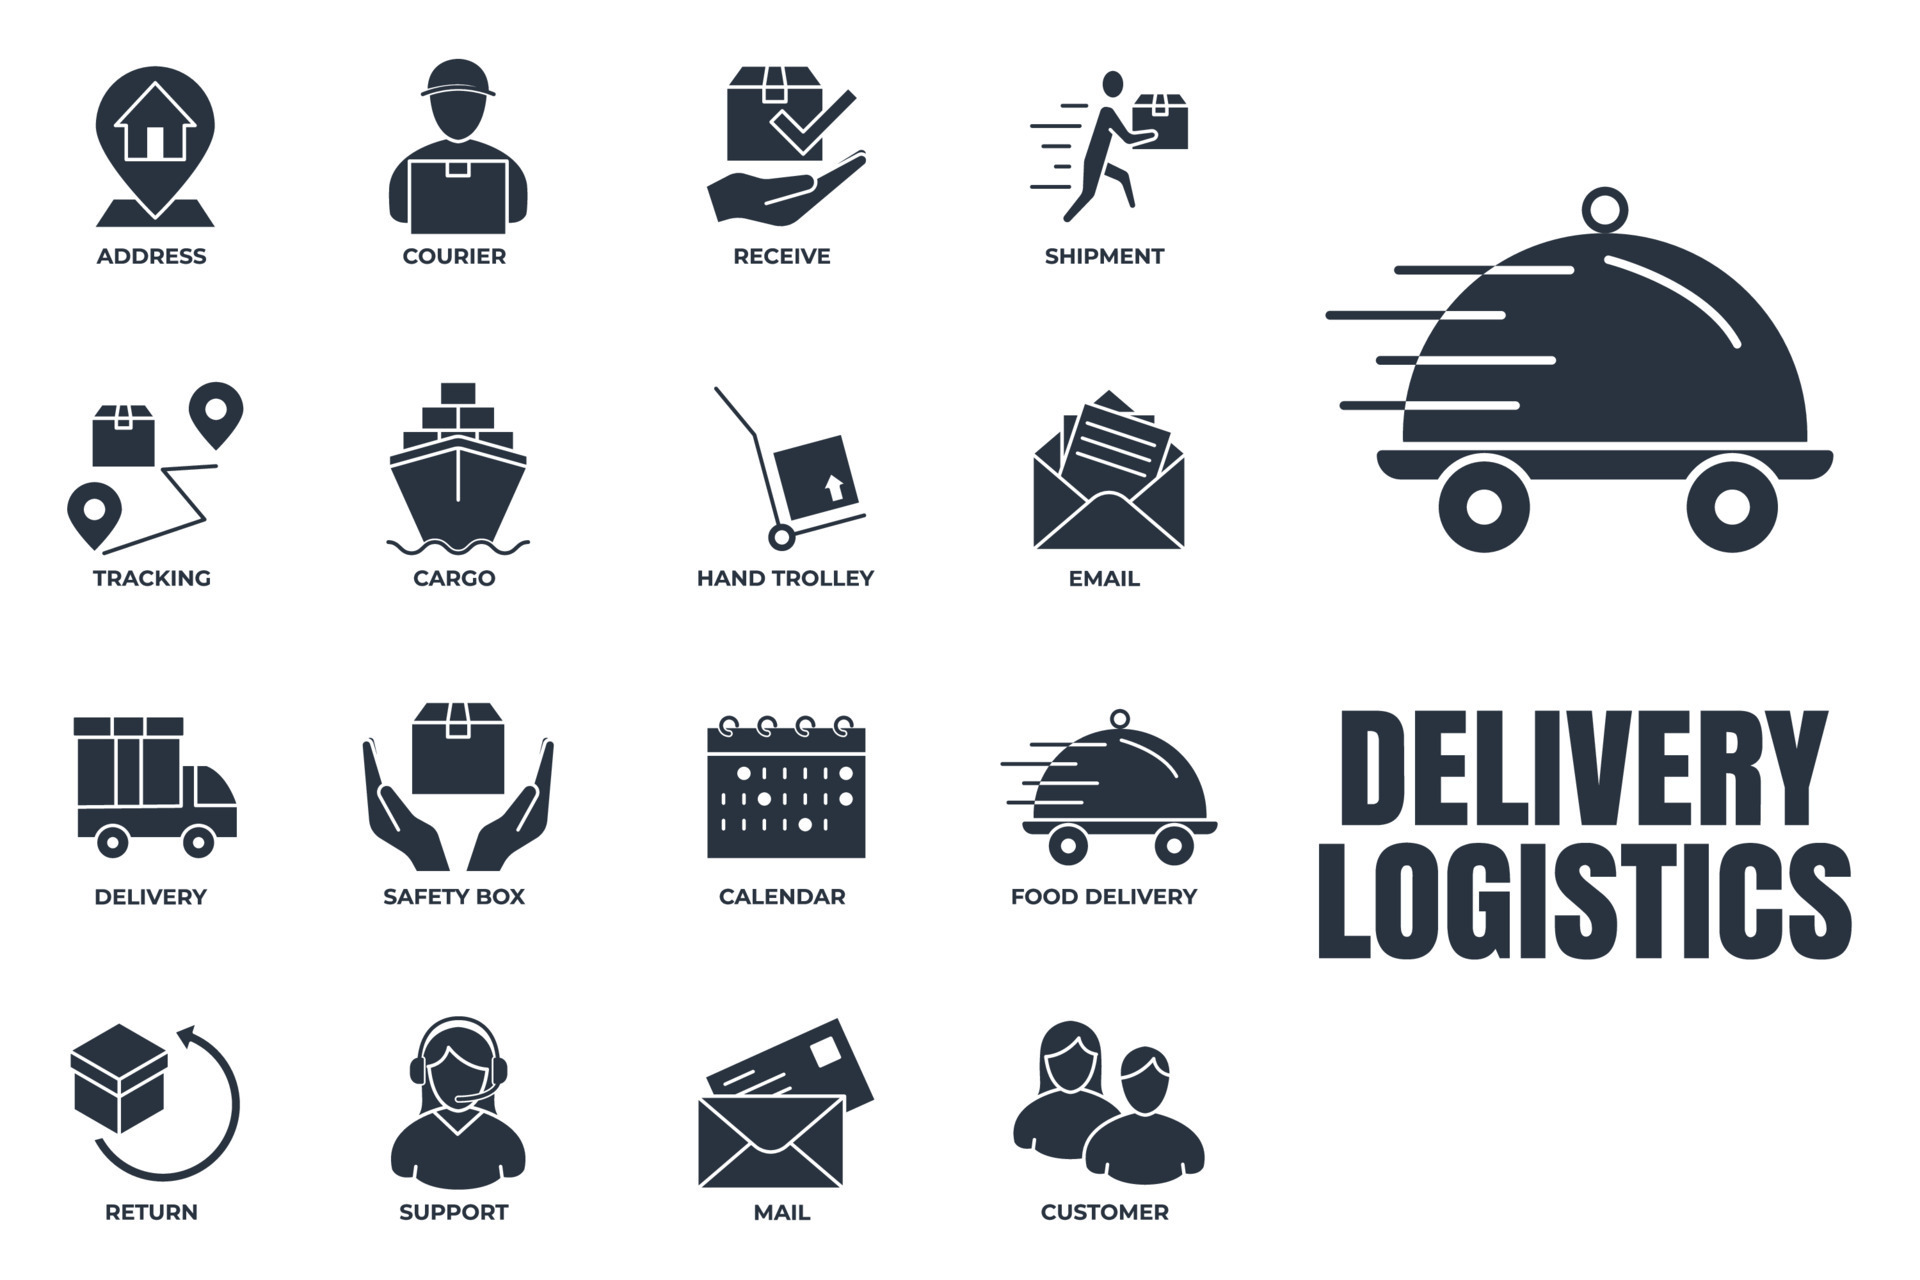 https://static.vecteezy.com/system/resources/previews/010/575/327/original/set-of-delivery-shipping-icon-logo-illustration-logistics-pack-symbol-template-for-graphic-and-web-design-collection-vector.jpg